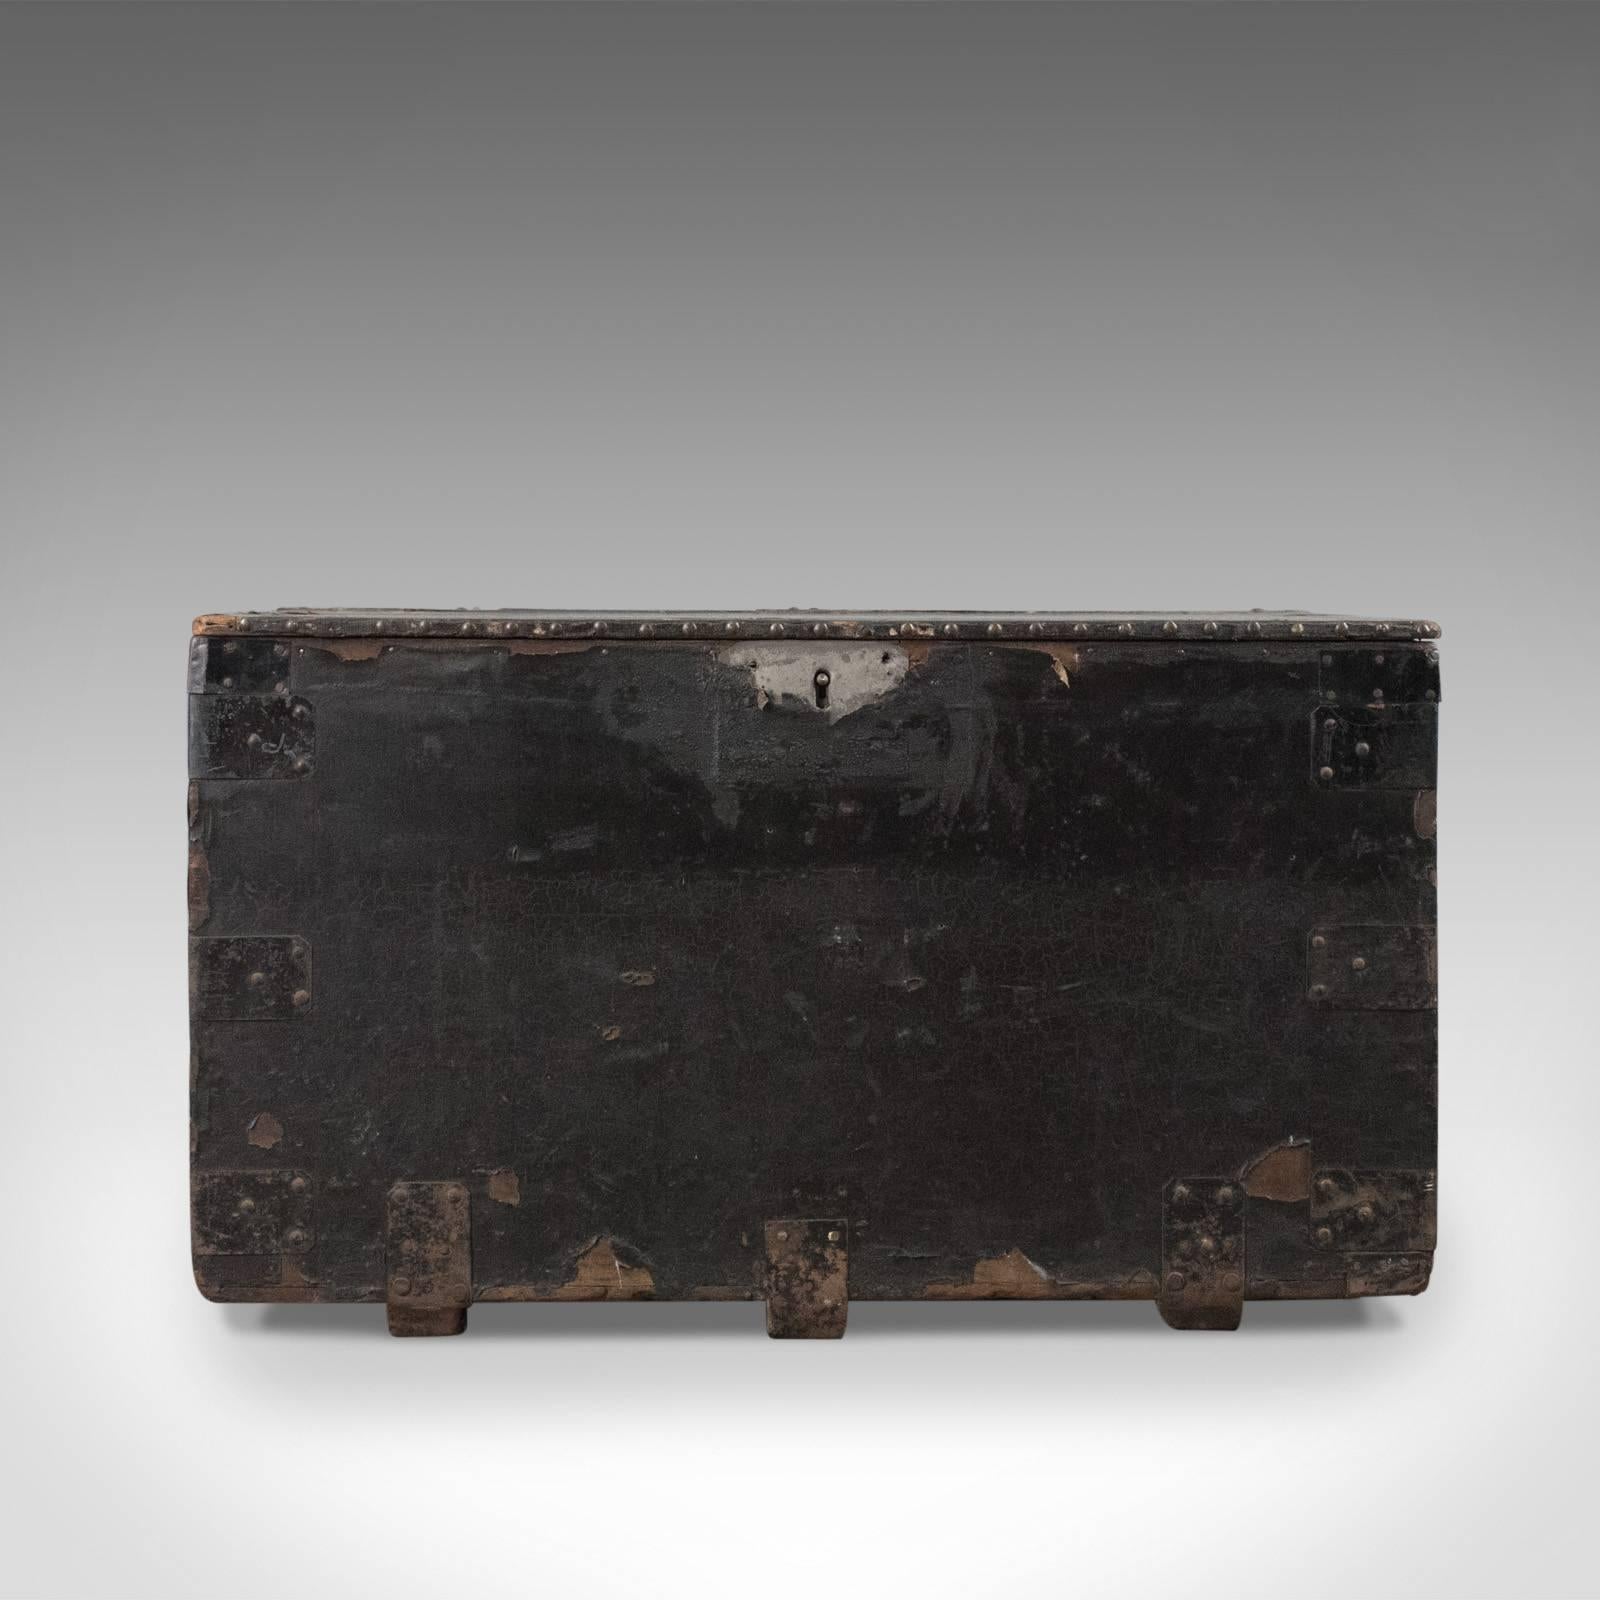 This is an antique tool chest, an English, Victorian, metal bound, mahogany trunk dating to circa 1900.

Charming original finish displaying desirable, distressed character
Metal bound and riveted for strength over good quality mahogany
Iron